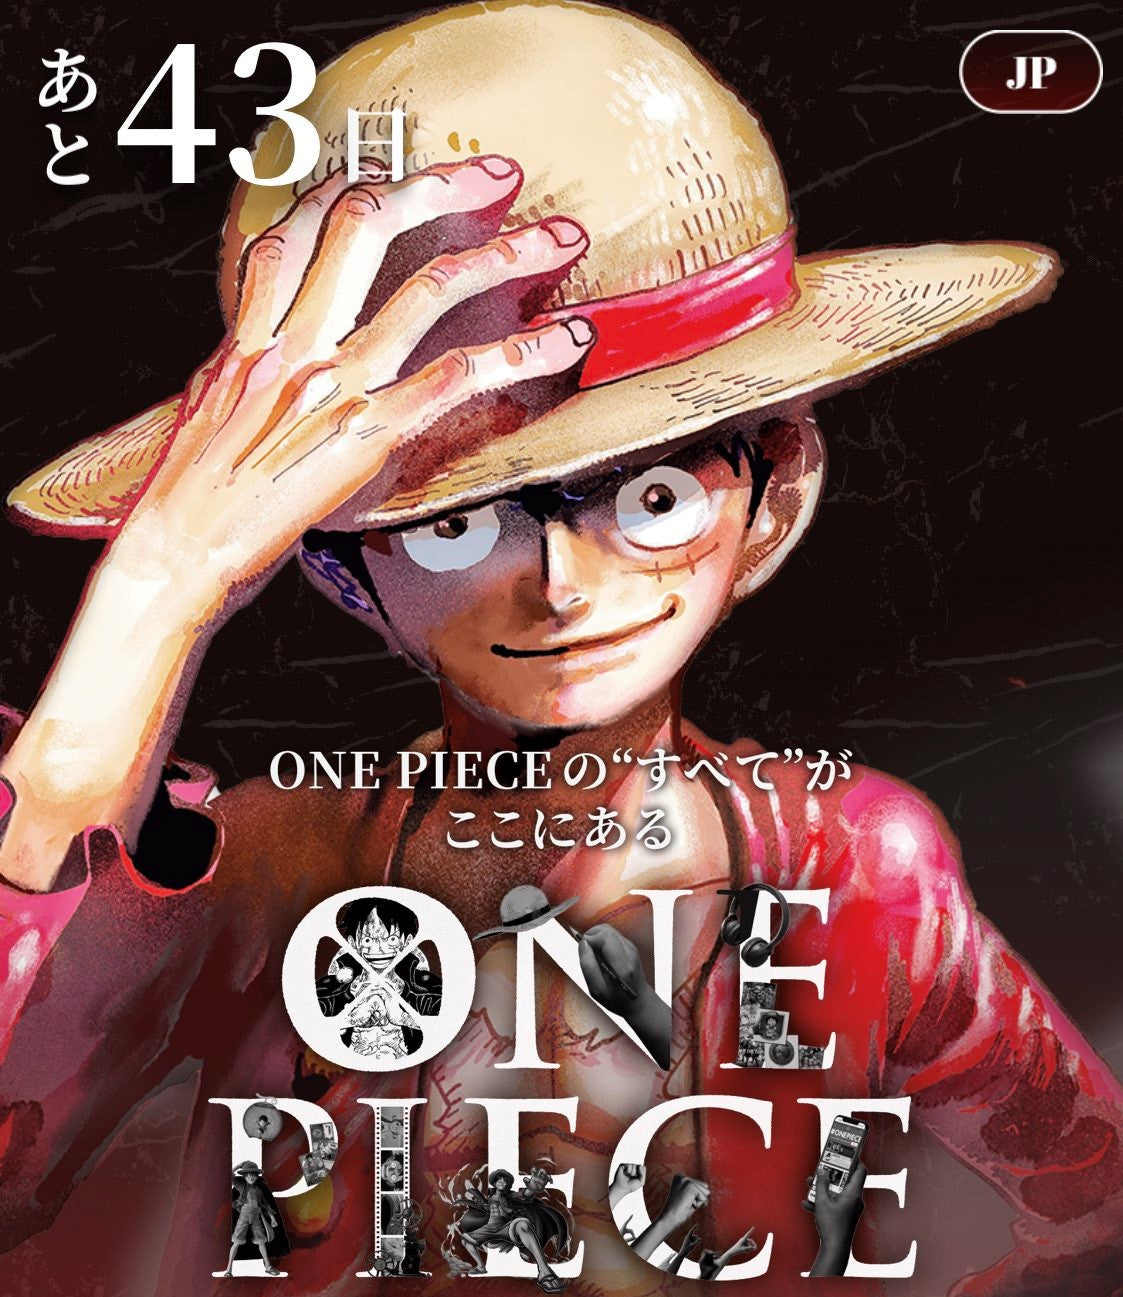 One Piece 25th Anniversary Short Video Tracks the Epic Journey Across 3,463 Used-Up Pen Nibs